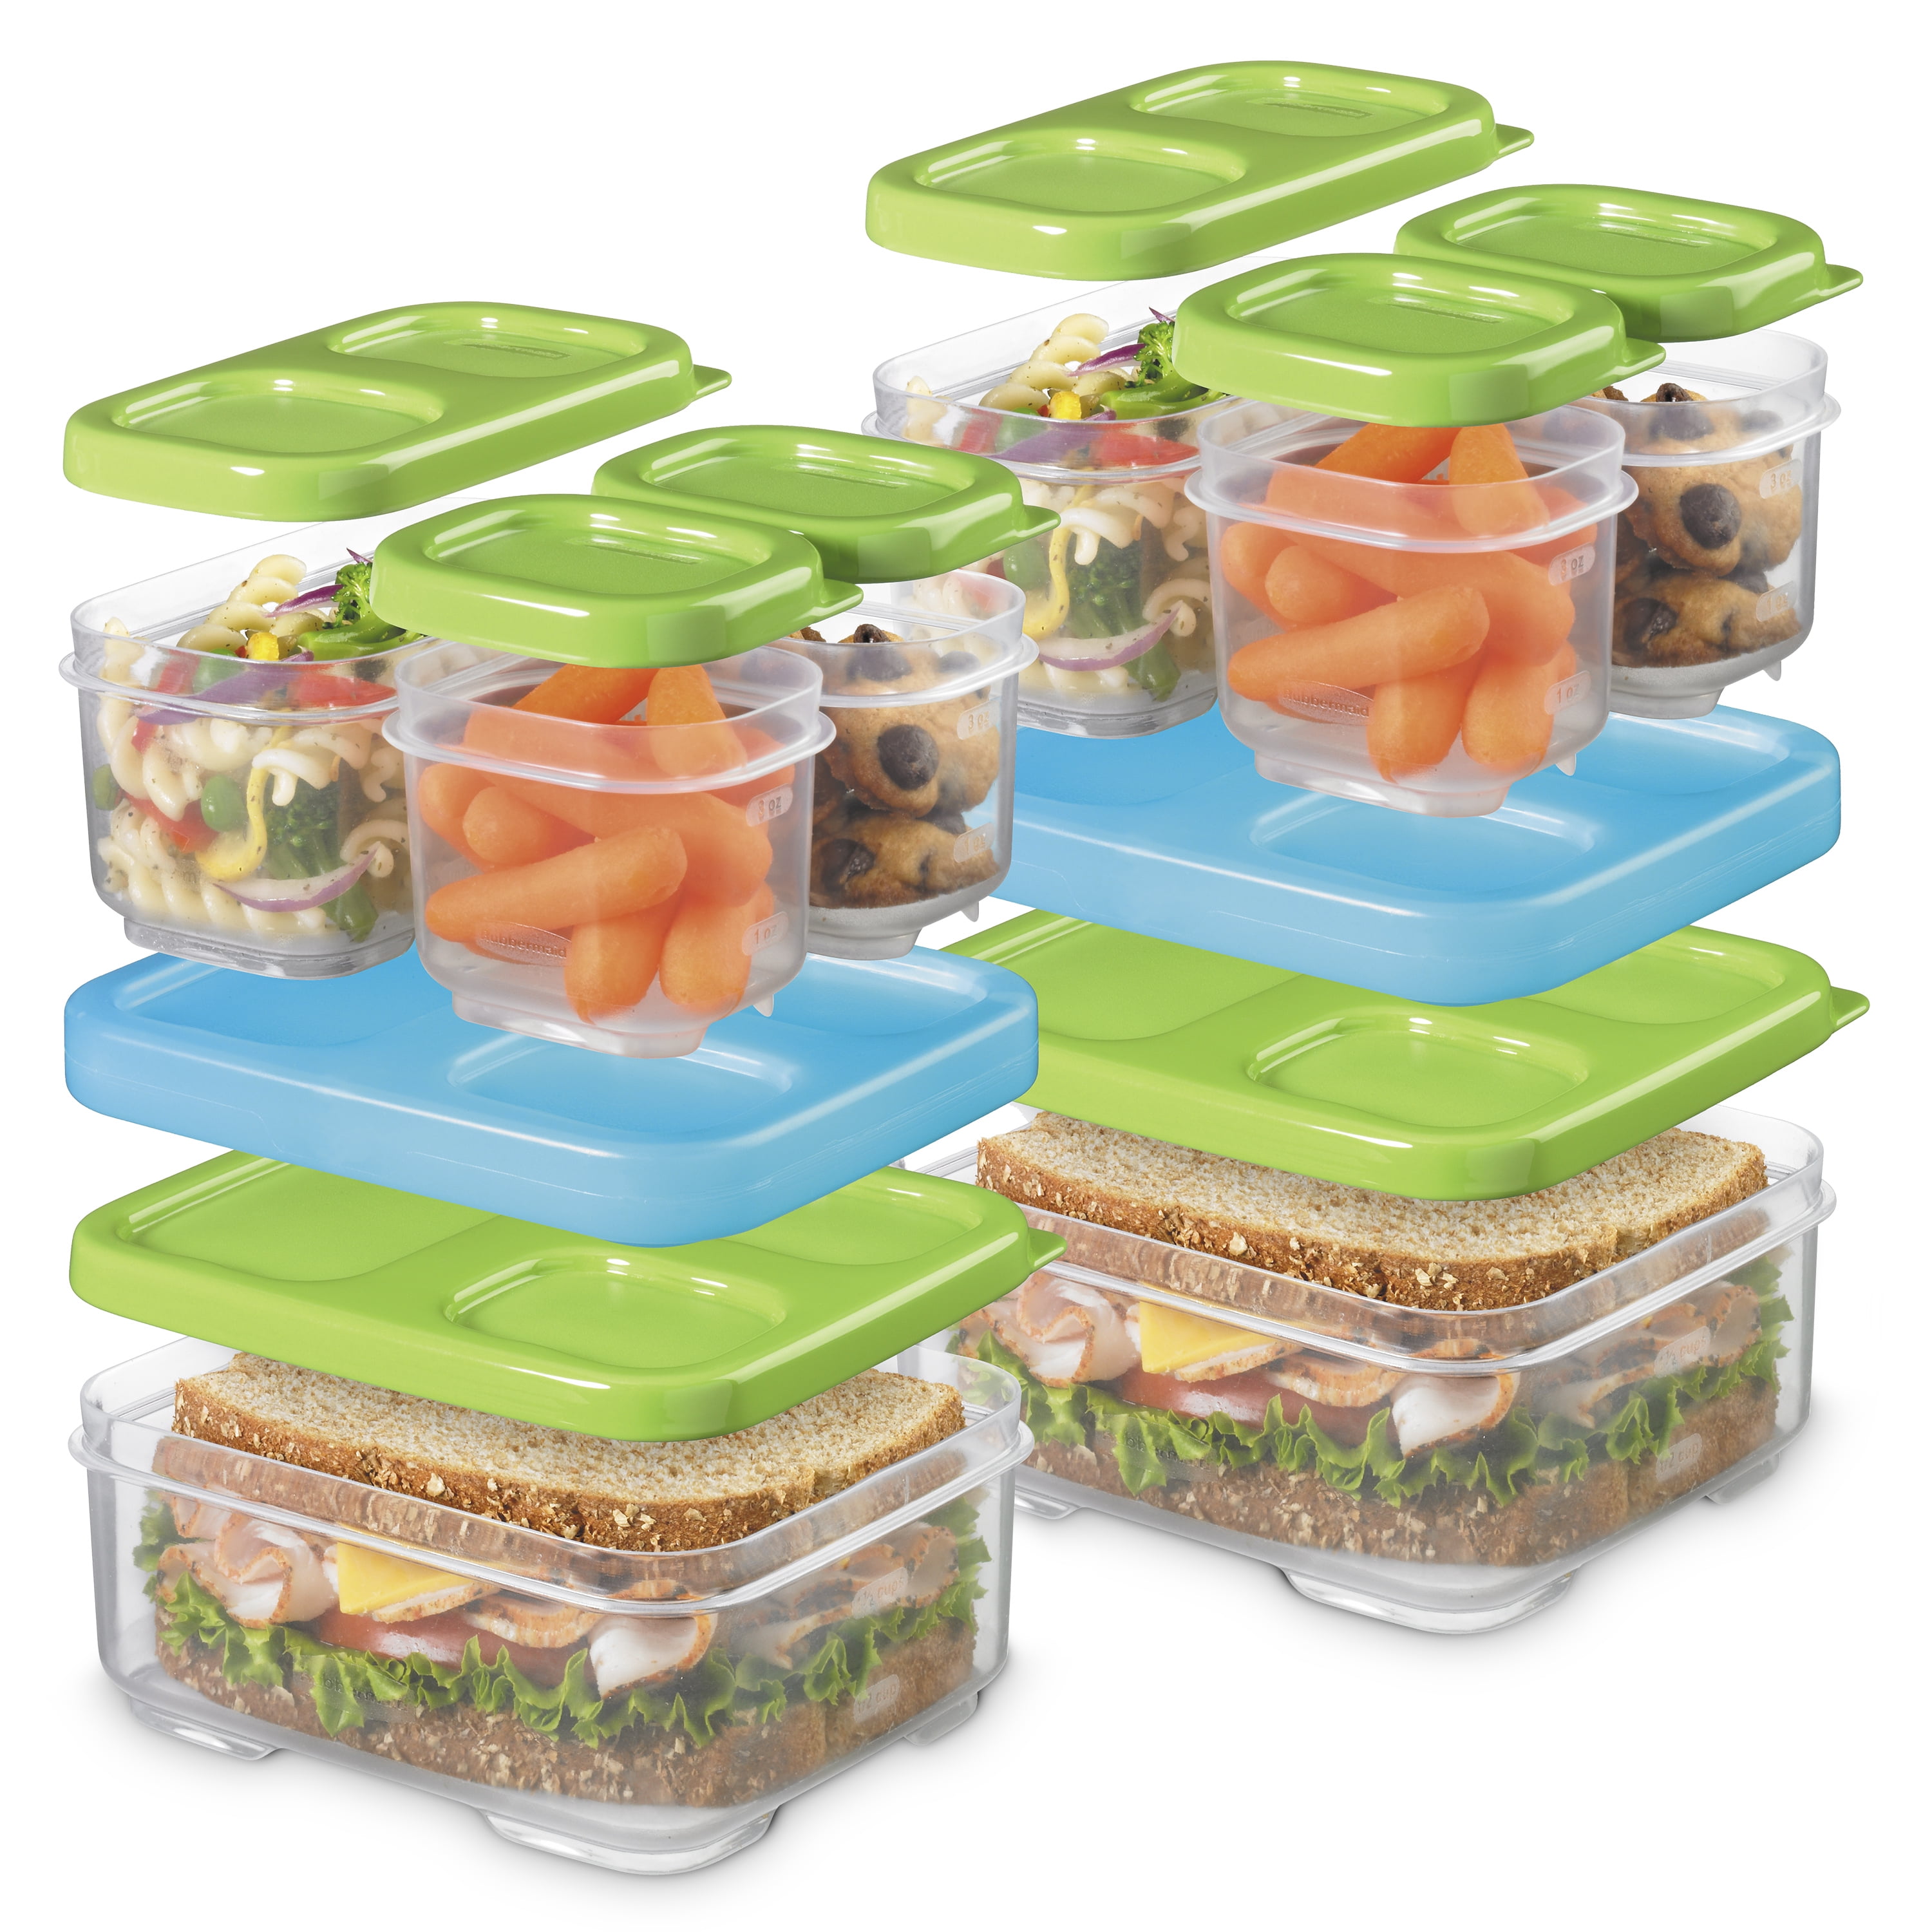 Rubbermaid LunchBlox Leak-Proof Entree Lunch Container Kit, Large, Blue  2000665